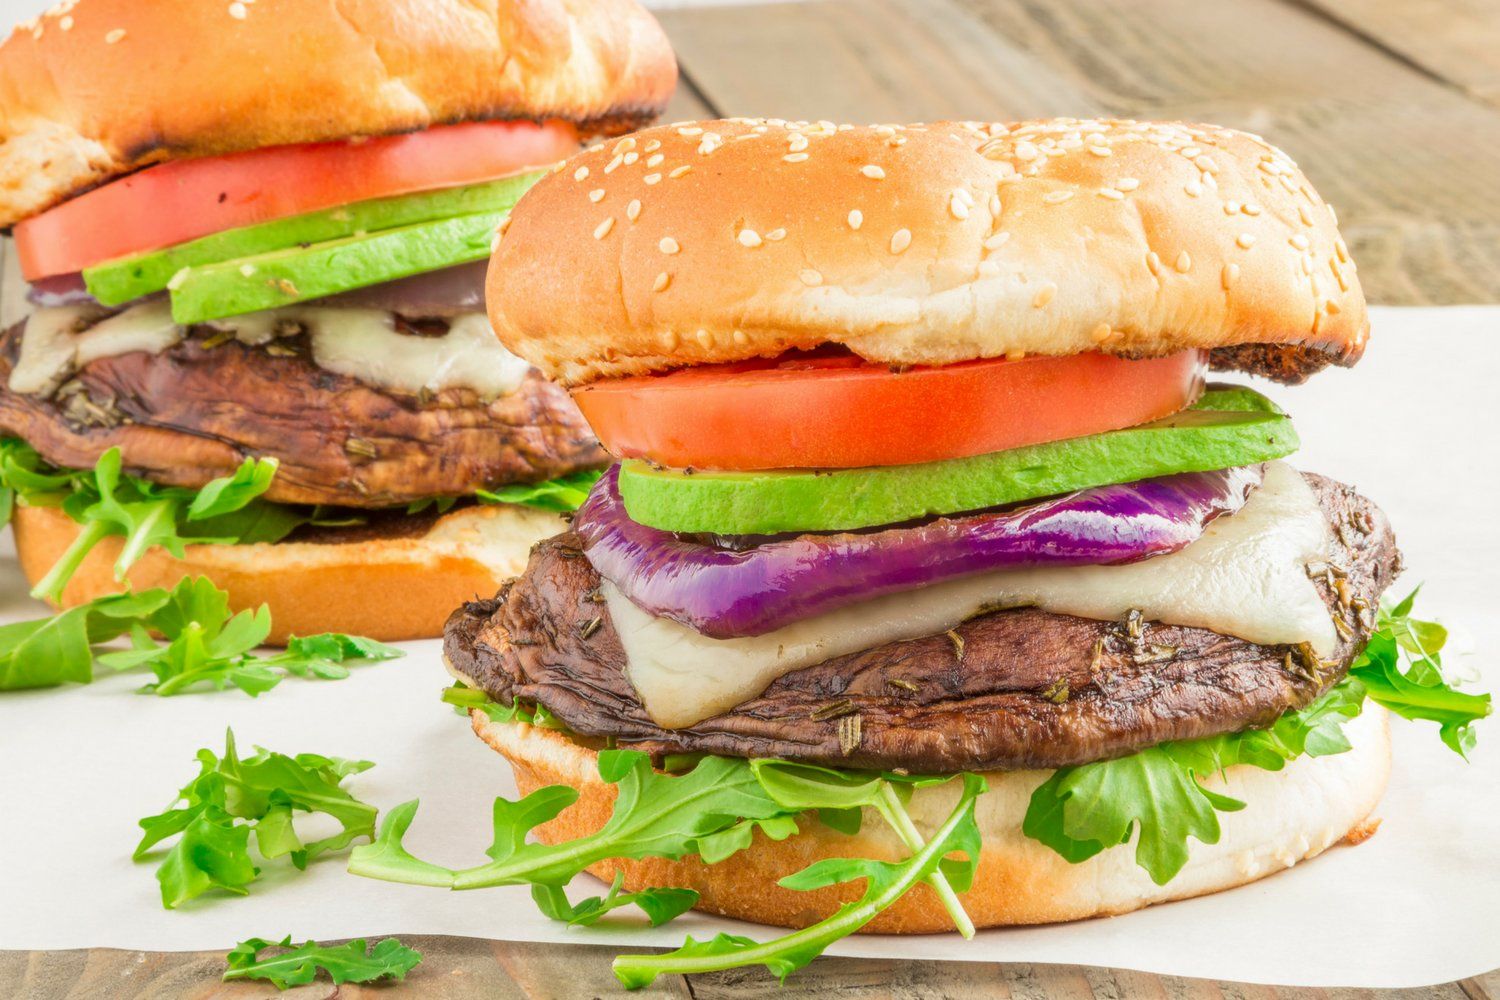 Grilled Portobello Burgers with Swiss Cheese and Avocado